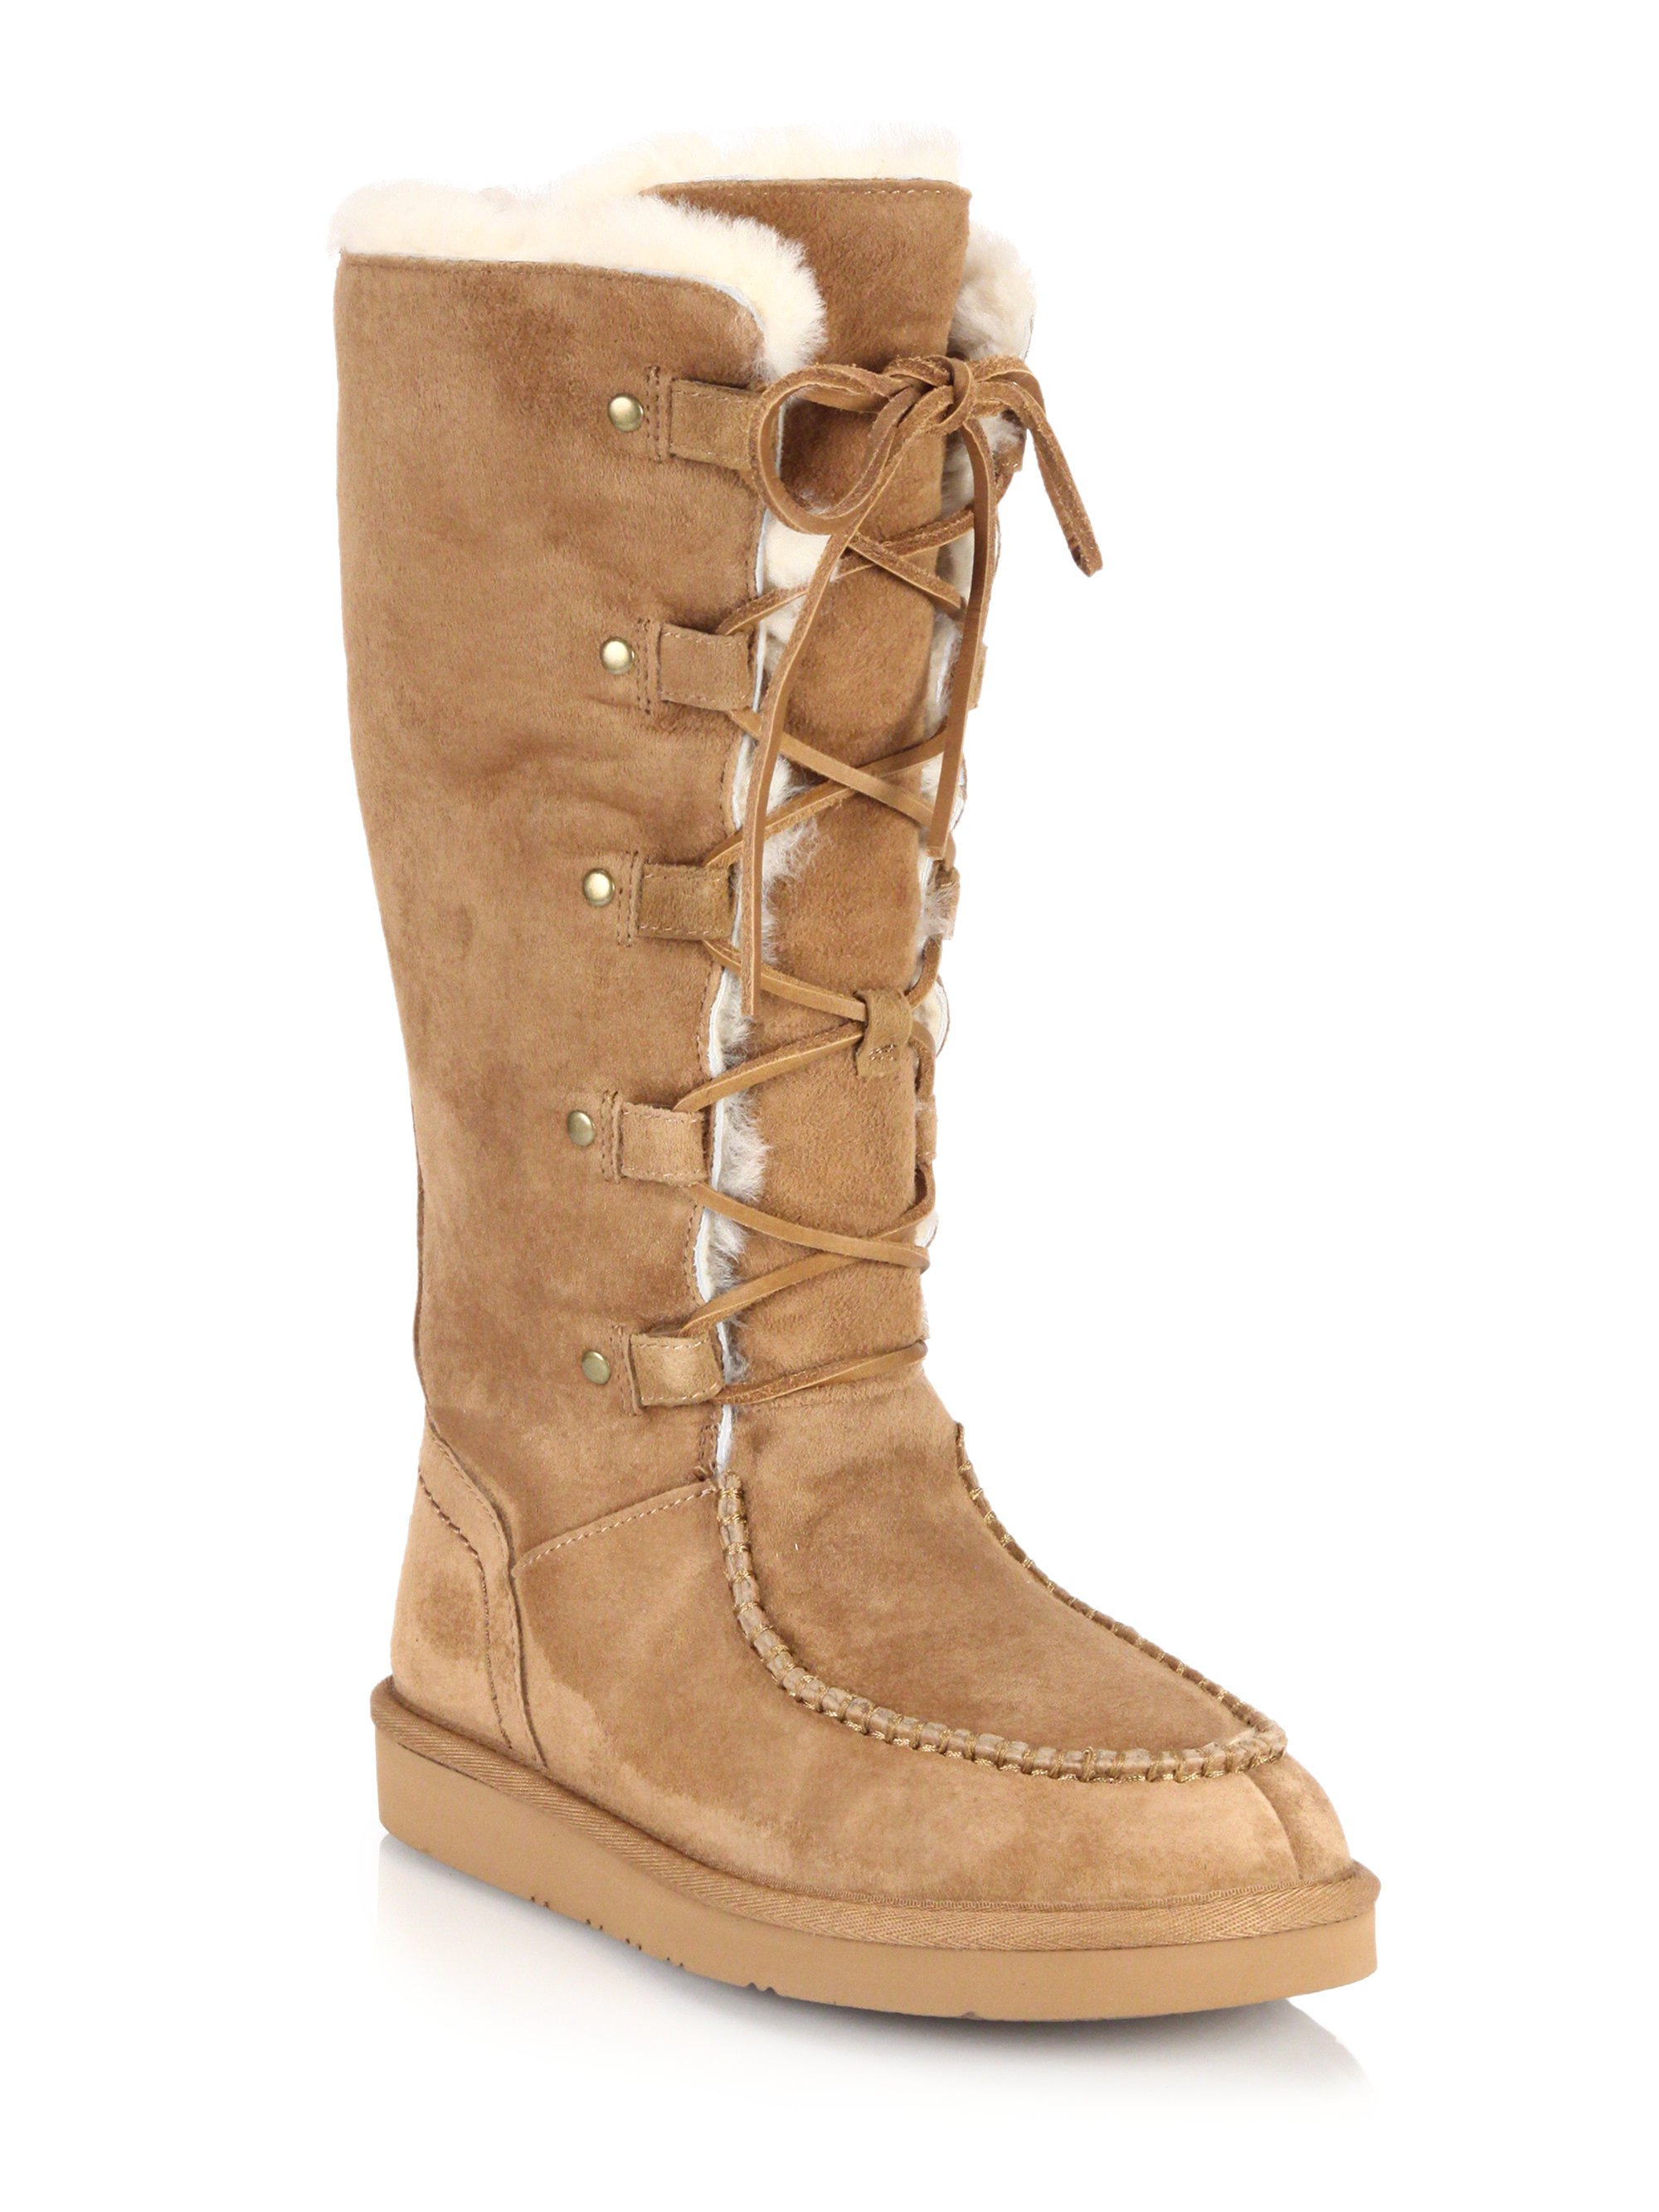 ugg front lace up boots